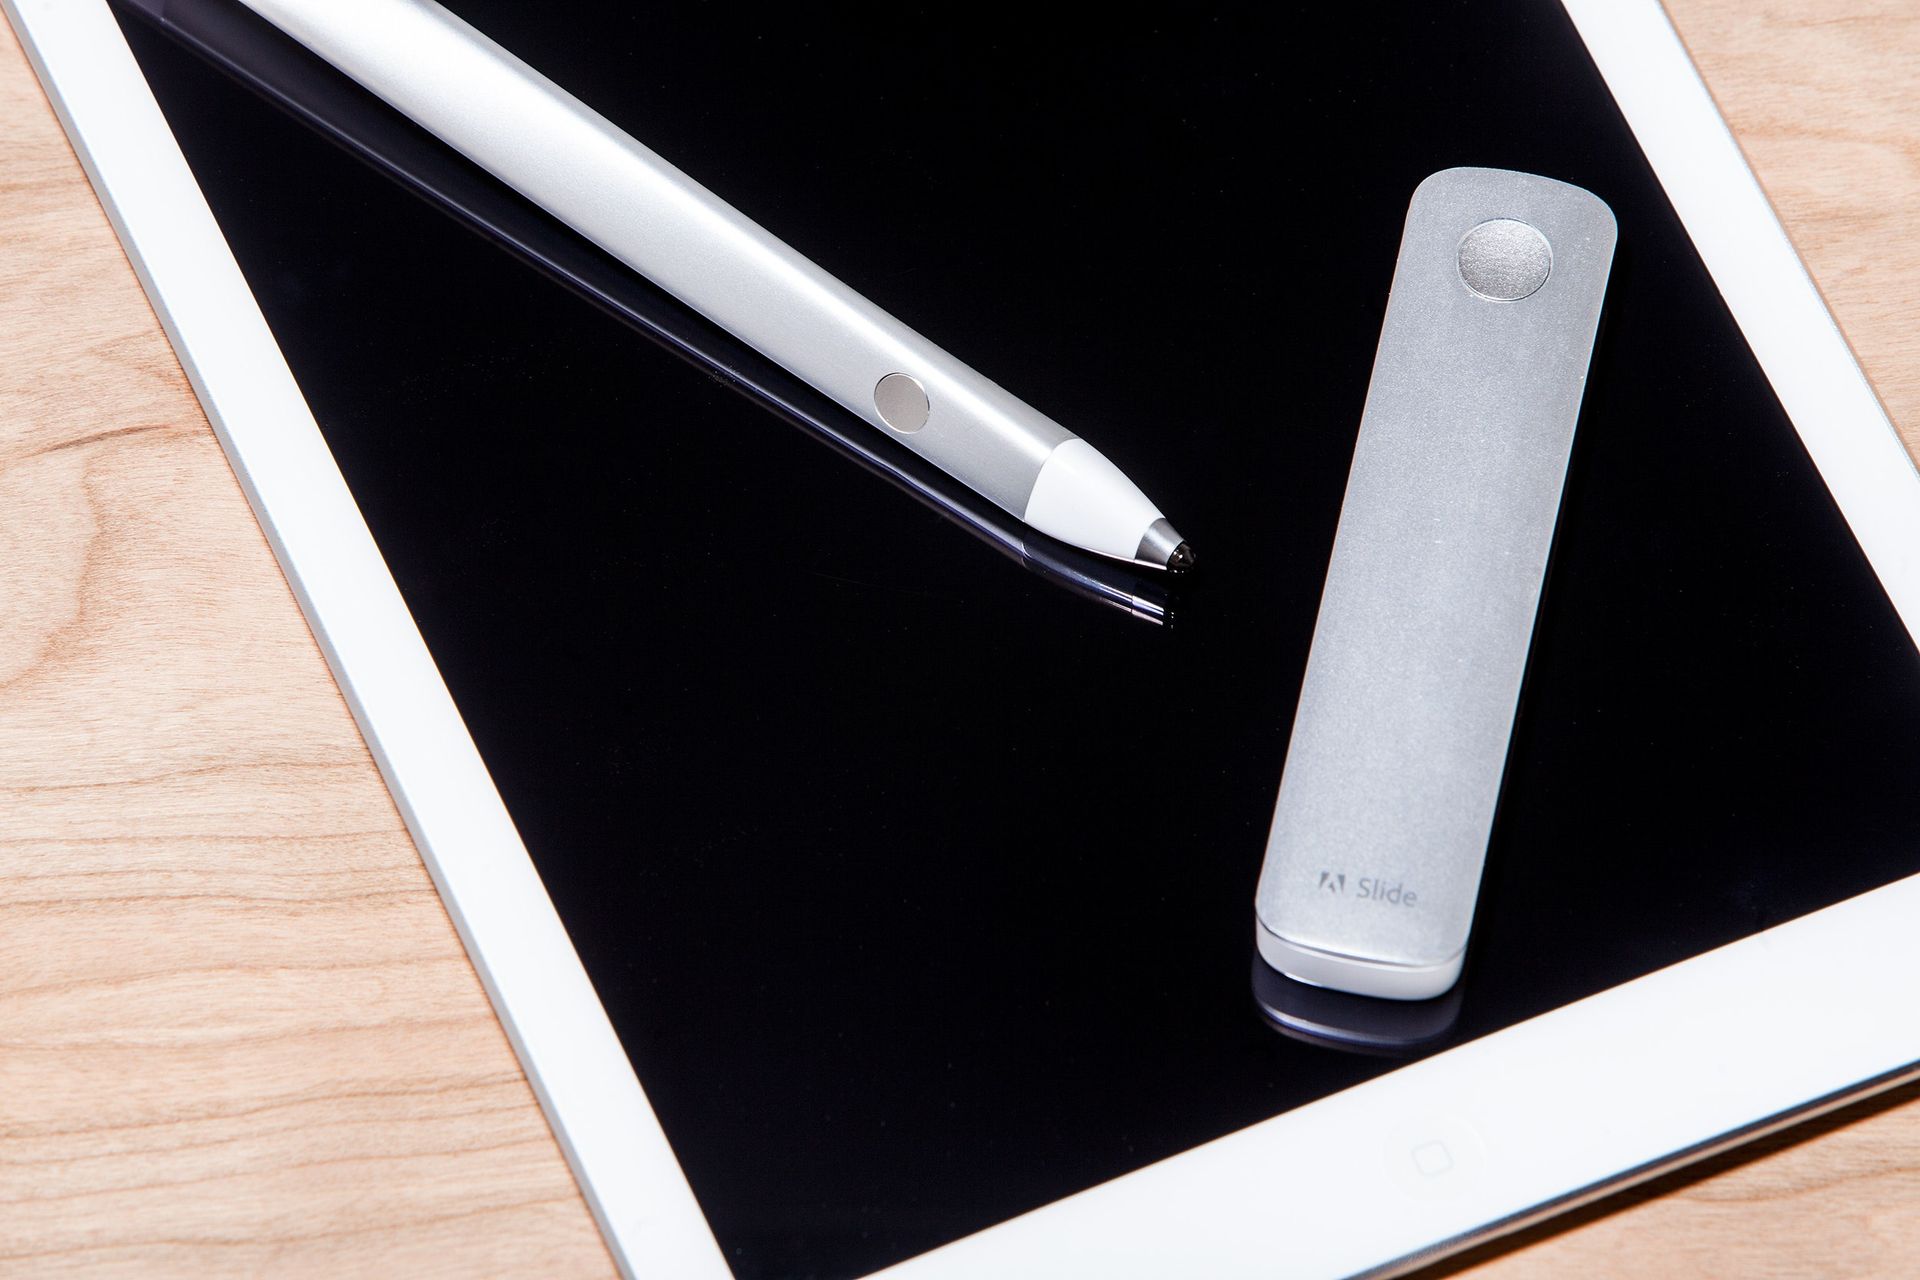 which-stylus-should-i-use-with-my-ipad